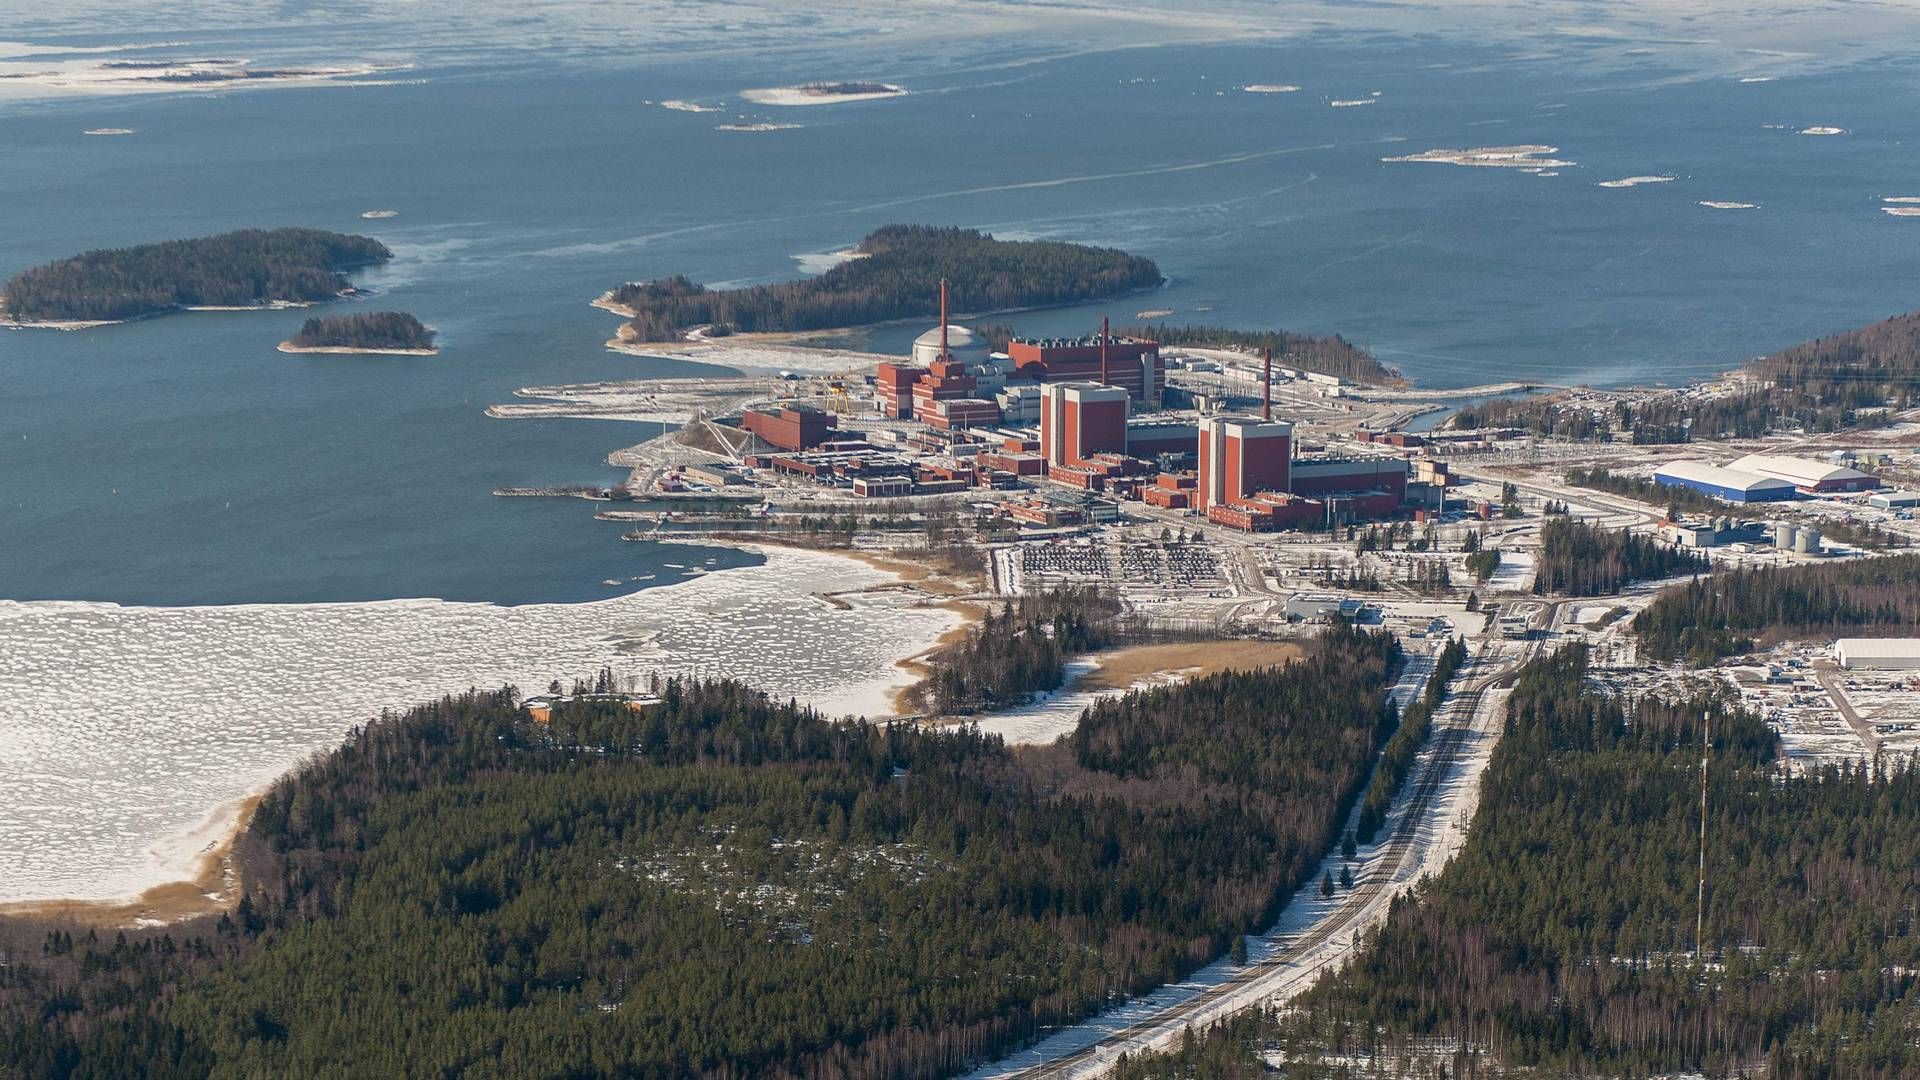 Finlands next-generation Olkiluoto 3 nuclear reactor has gone into regular production after months of delays, producing on its own around 14% of the countrys electricity, its operator TVO said April 16, 2023. The European pressurised water reactor (EPR), already more than 12 years behind schedule, was supposed to come fully online in December, but the start was pushed back several times during its testing phase | Photo: Tapani Karjanlahti/AFP/Ritzau Scanpix